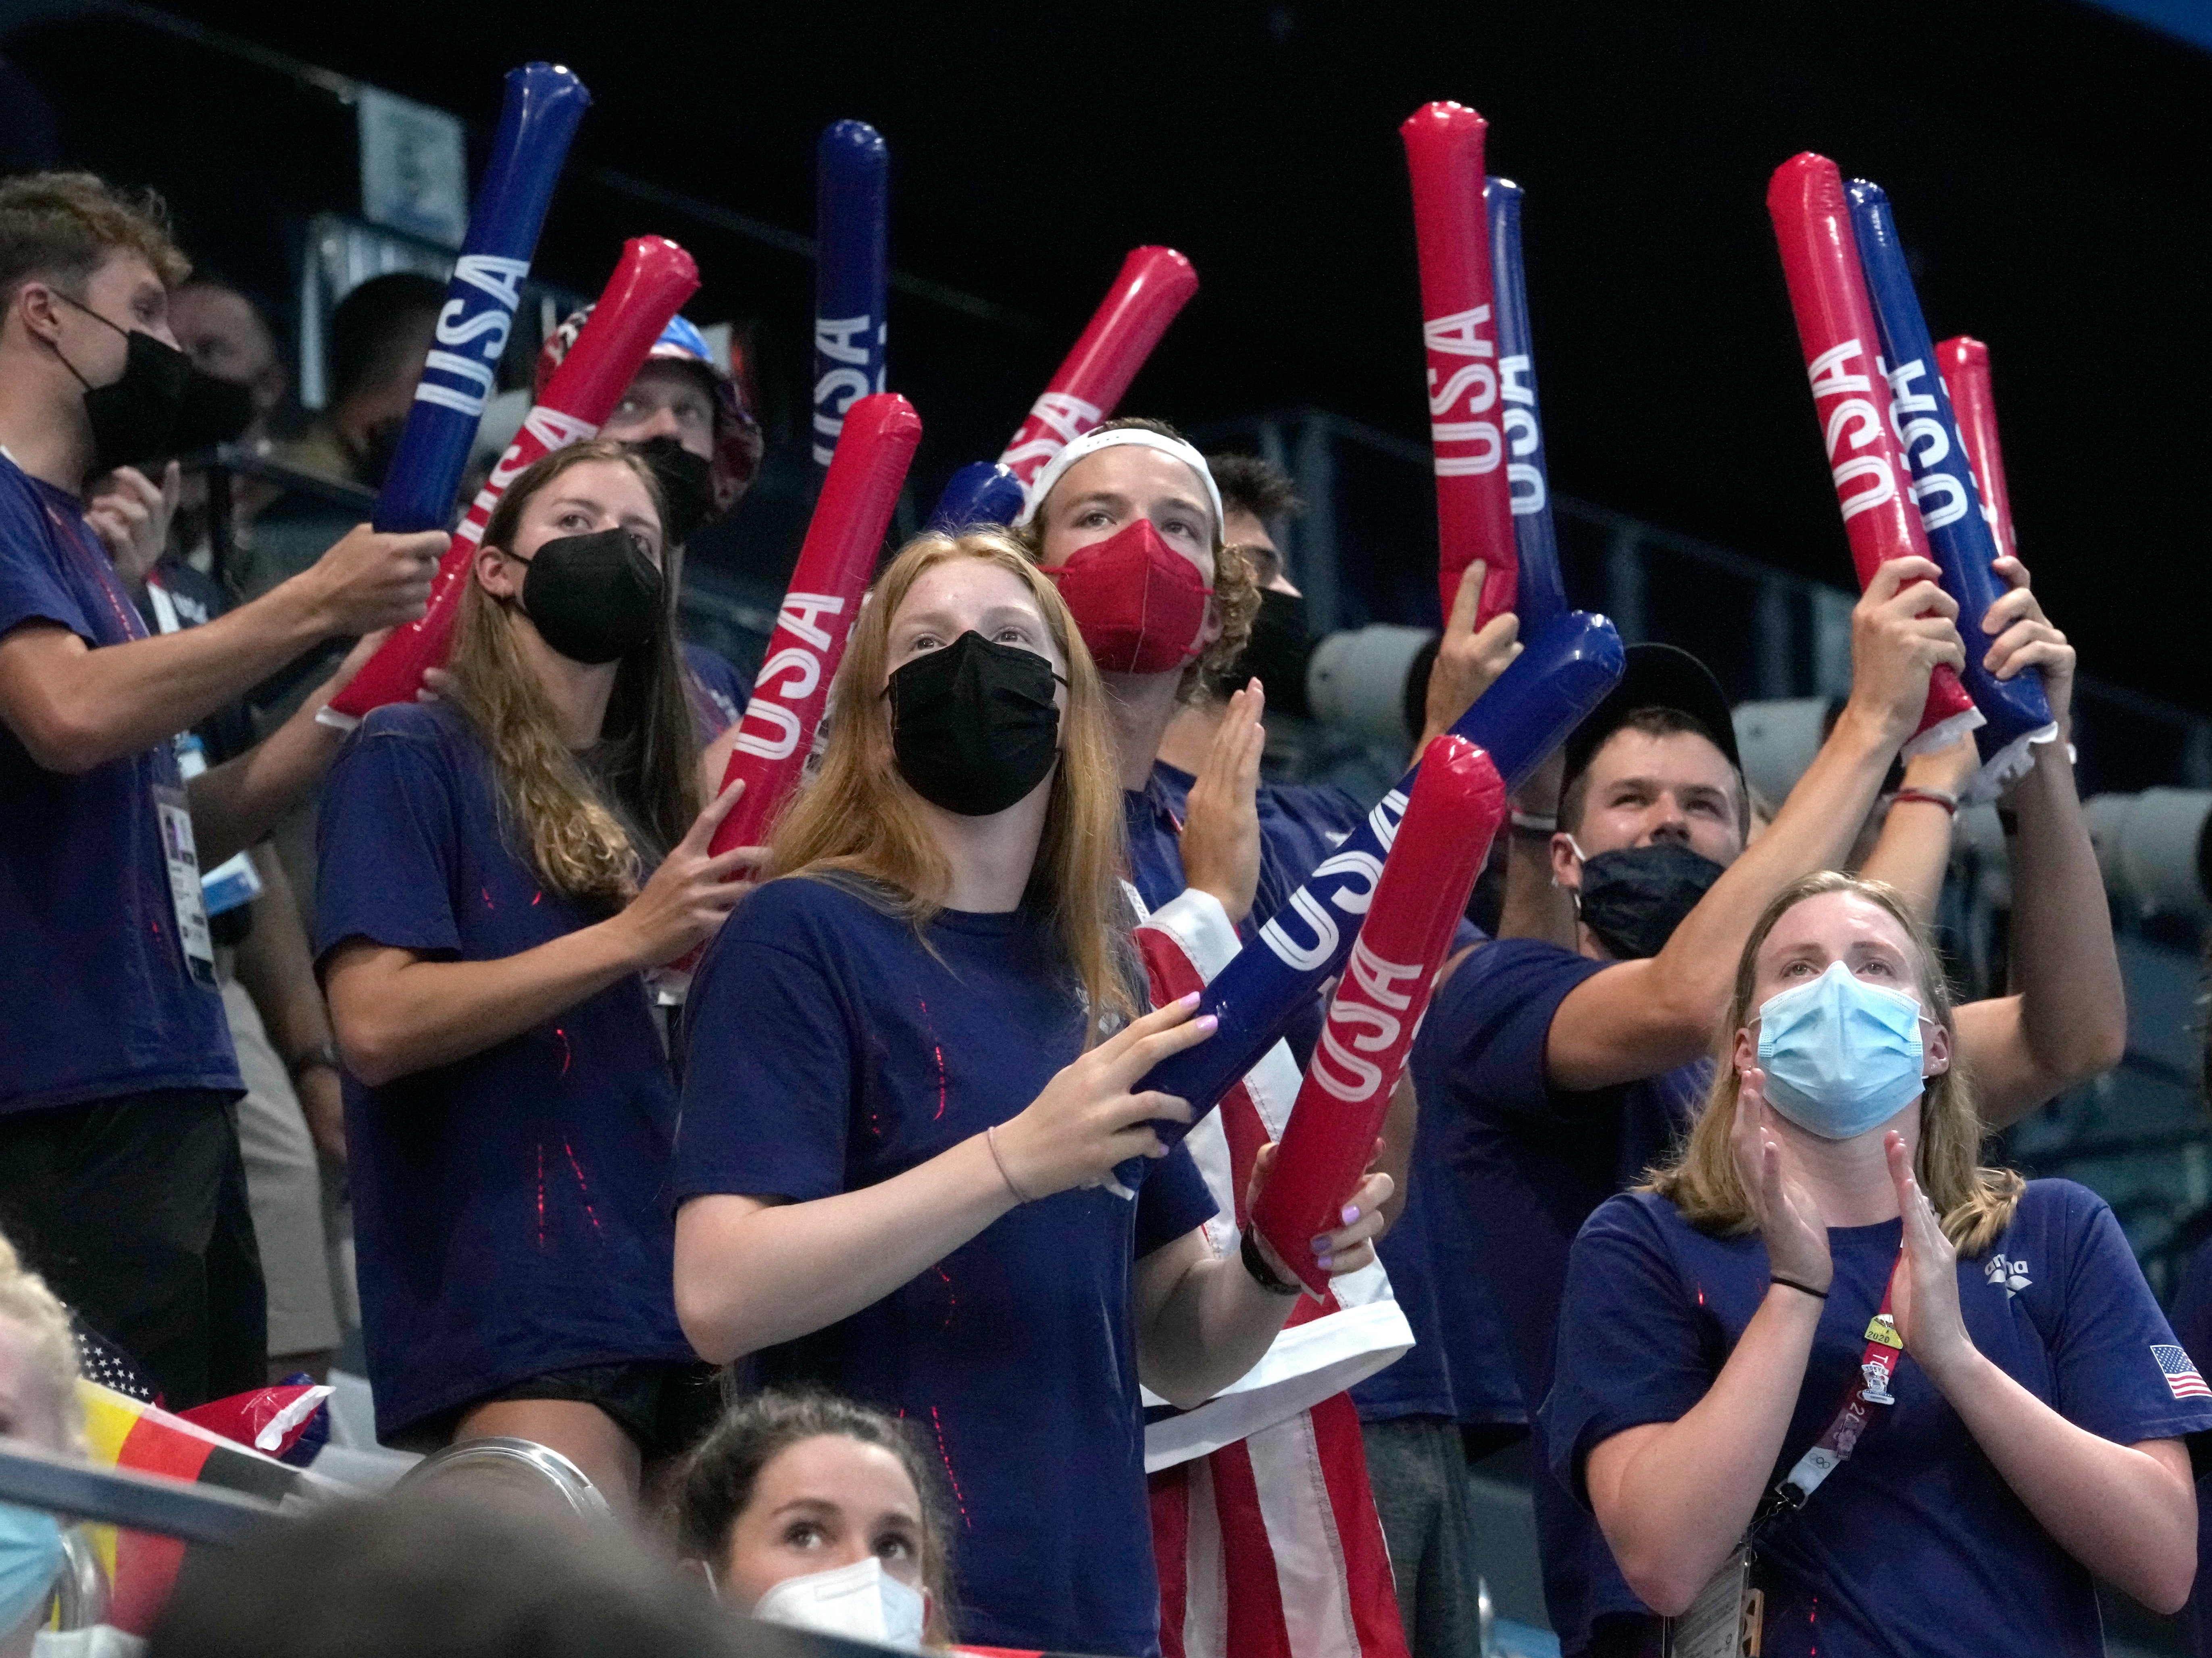 United States swimmers cheer on teammates during swimming competitions at the 2020 Summer Olympics, Saturday, July 24, 2021, in Tokyo, Japan.